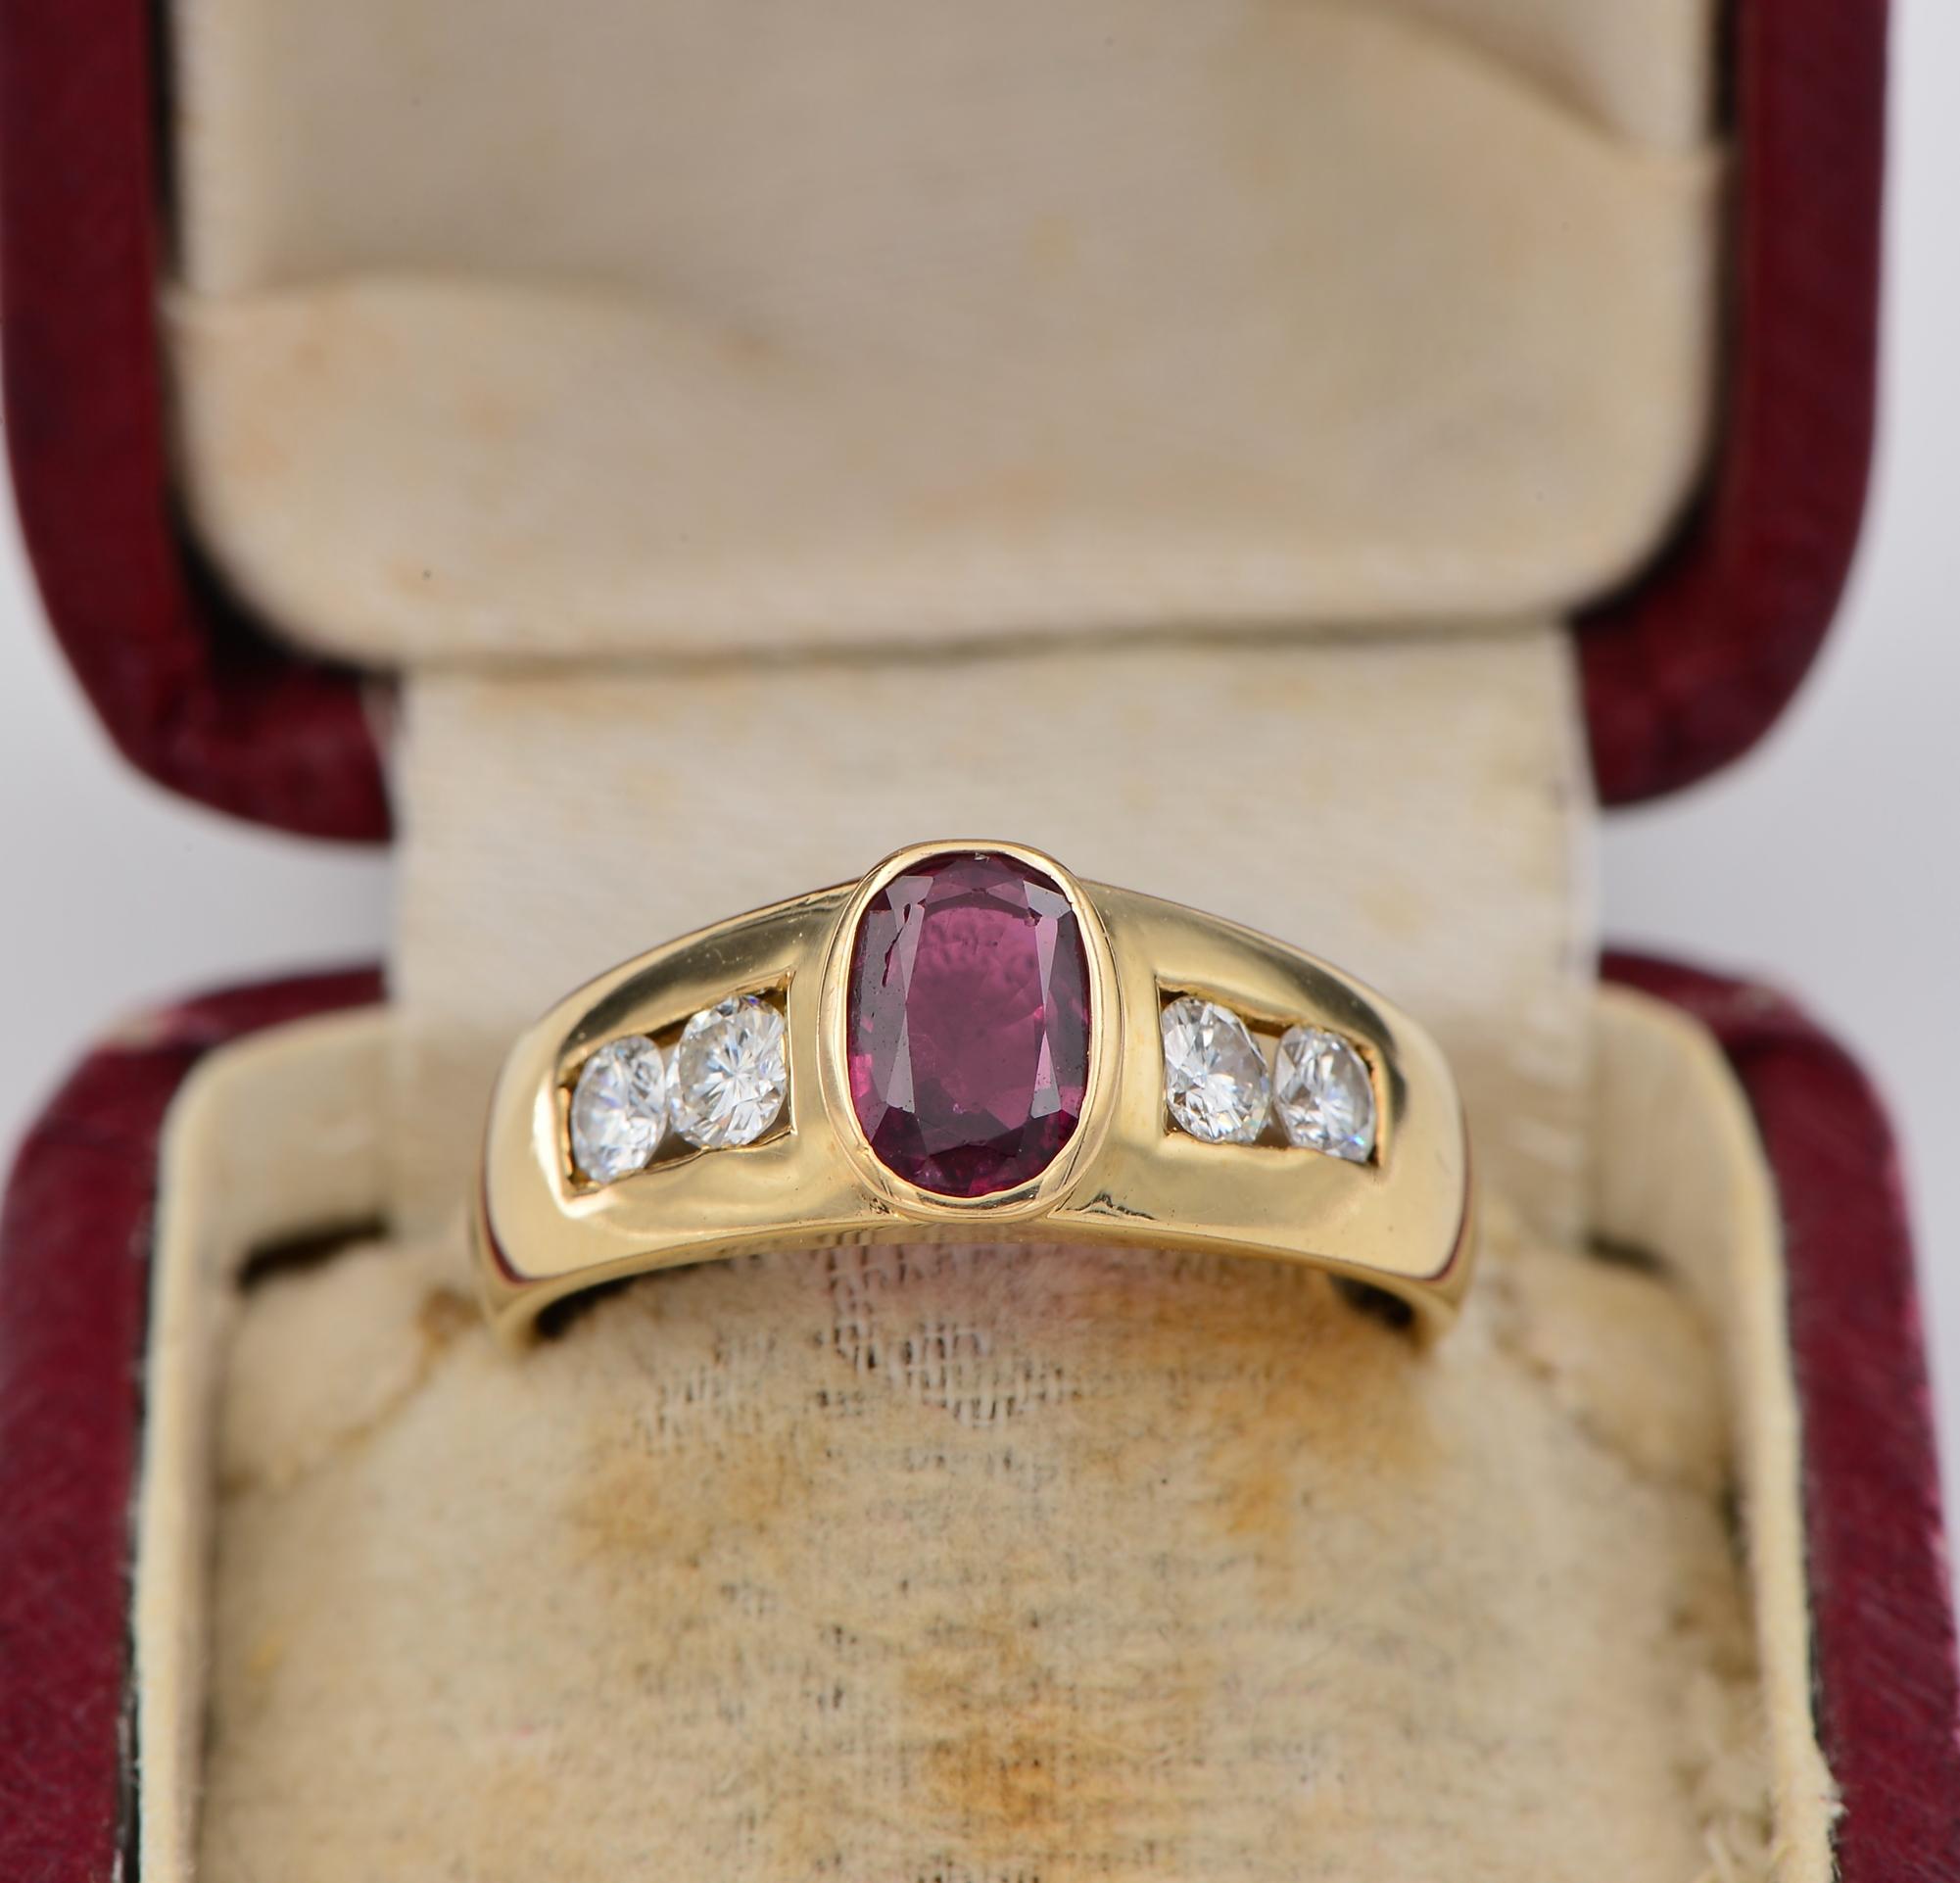 Gipsy Five Stone
This beautiful Retro five stone ring is 1940/45 ca
Suitable for either sex, comes in a traditional Gipsy design comprising a centre Ruby flanked by two Diamonds on either side
Mounting has been hand crafted of solid 18 Kt gold,